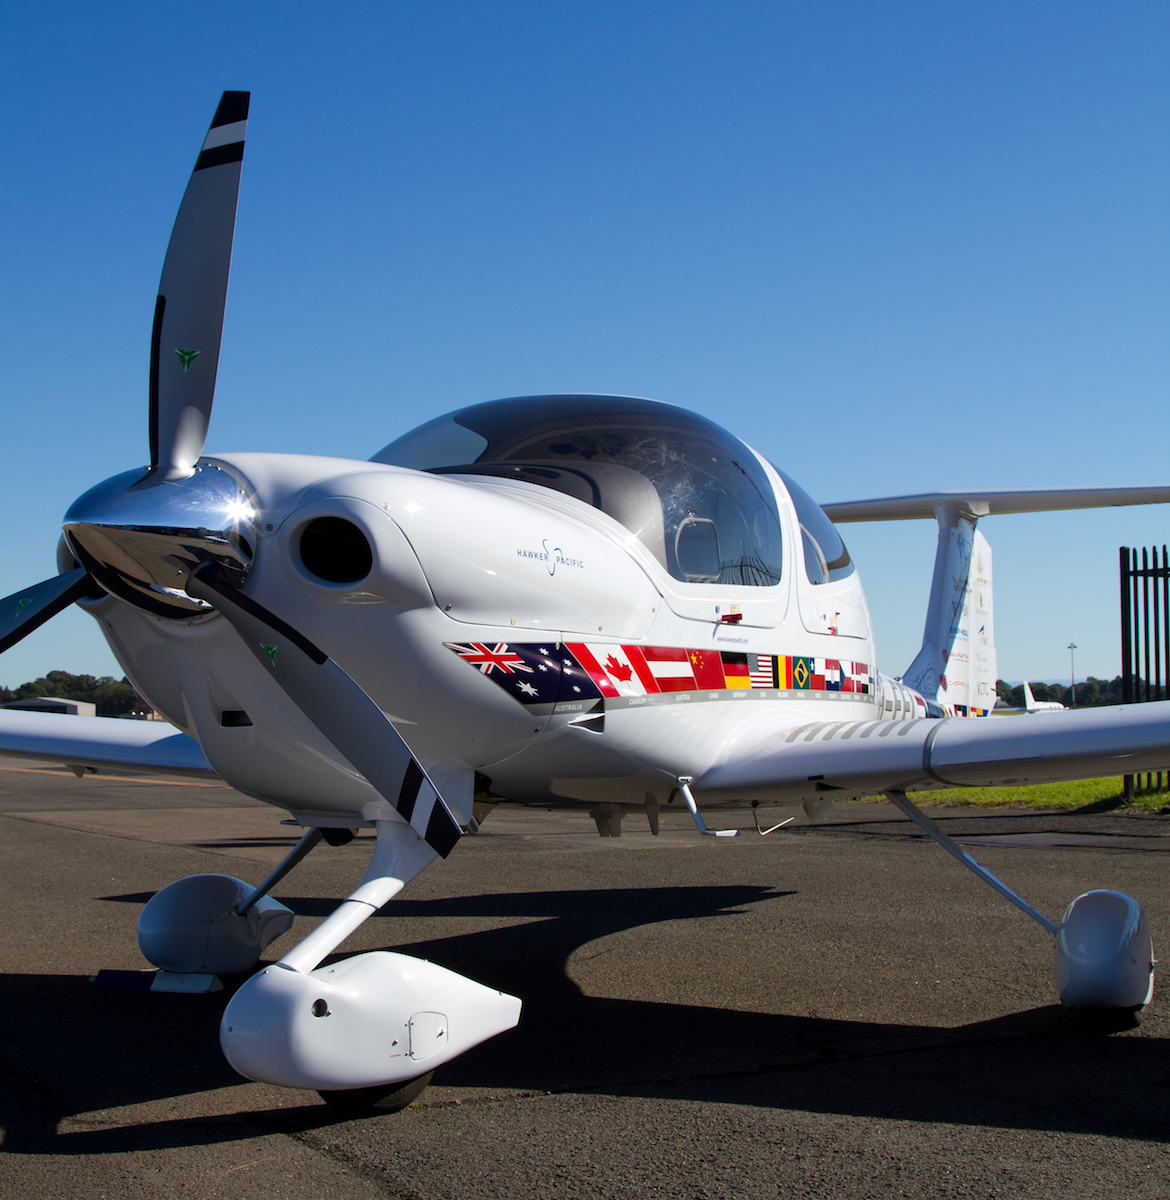 The DA40 XLT has the flags of many nations which have the aircraft. (Seth Jaworski)